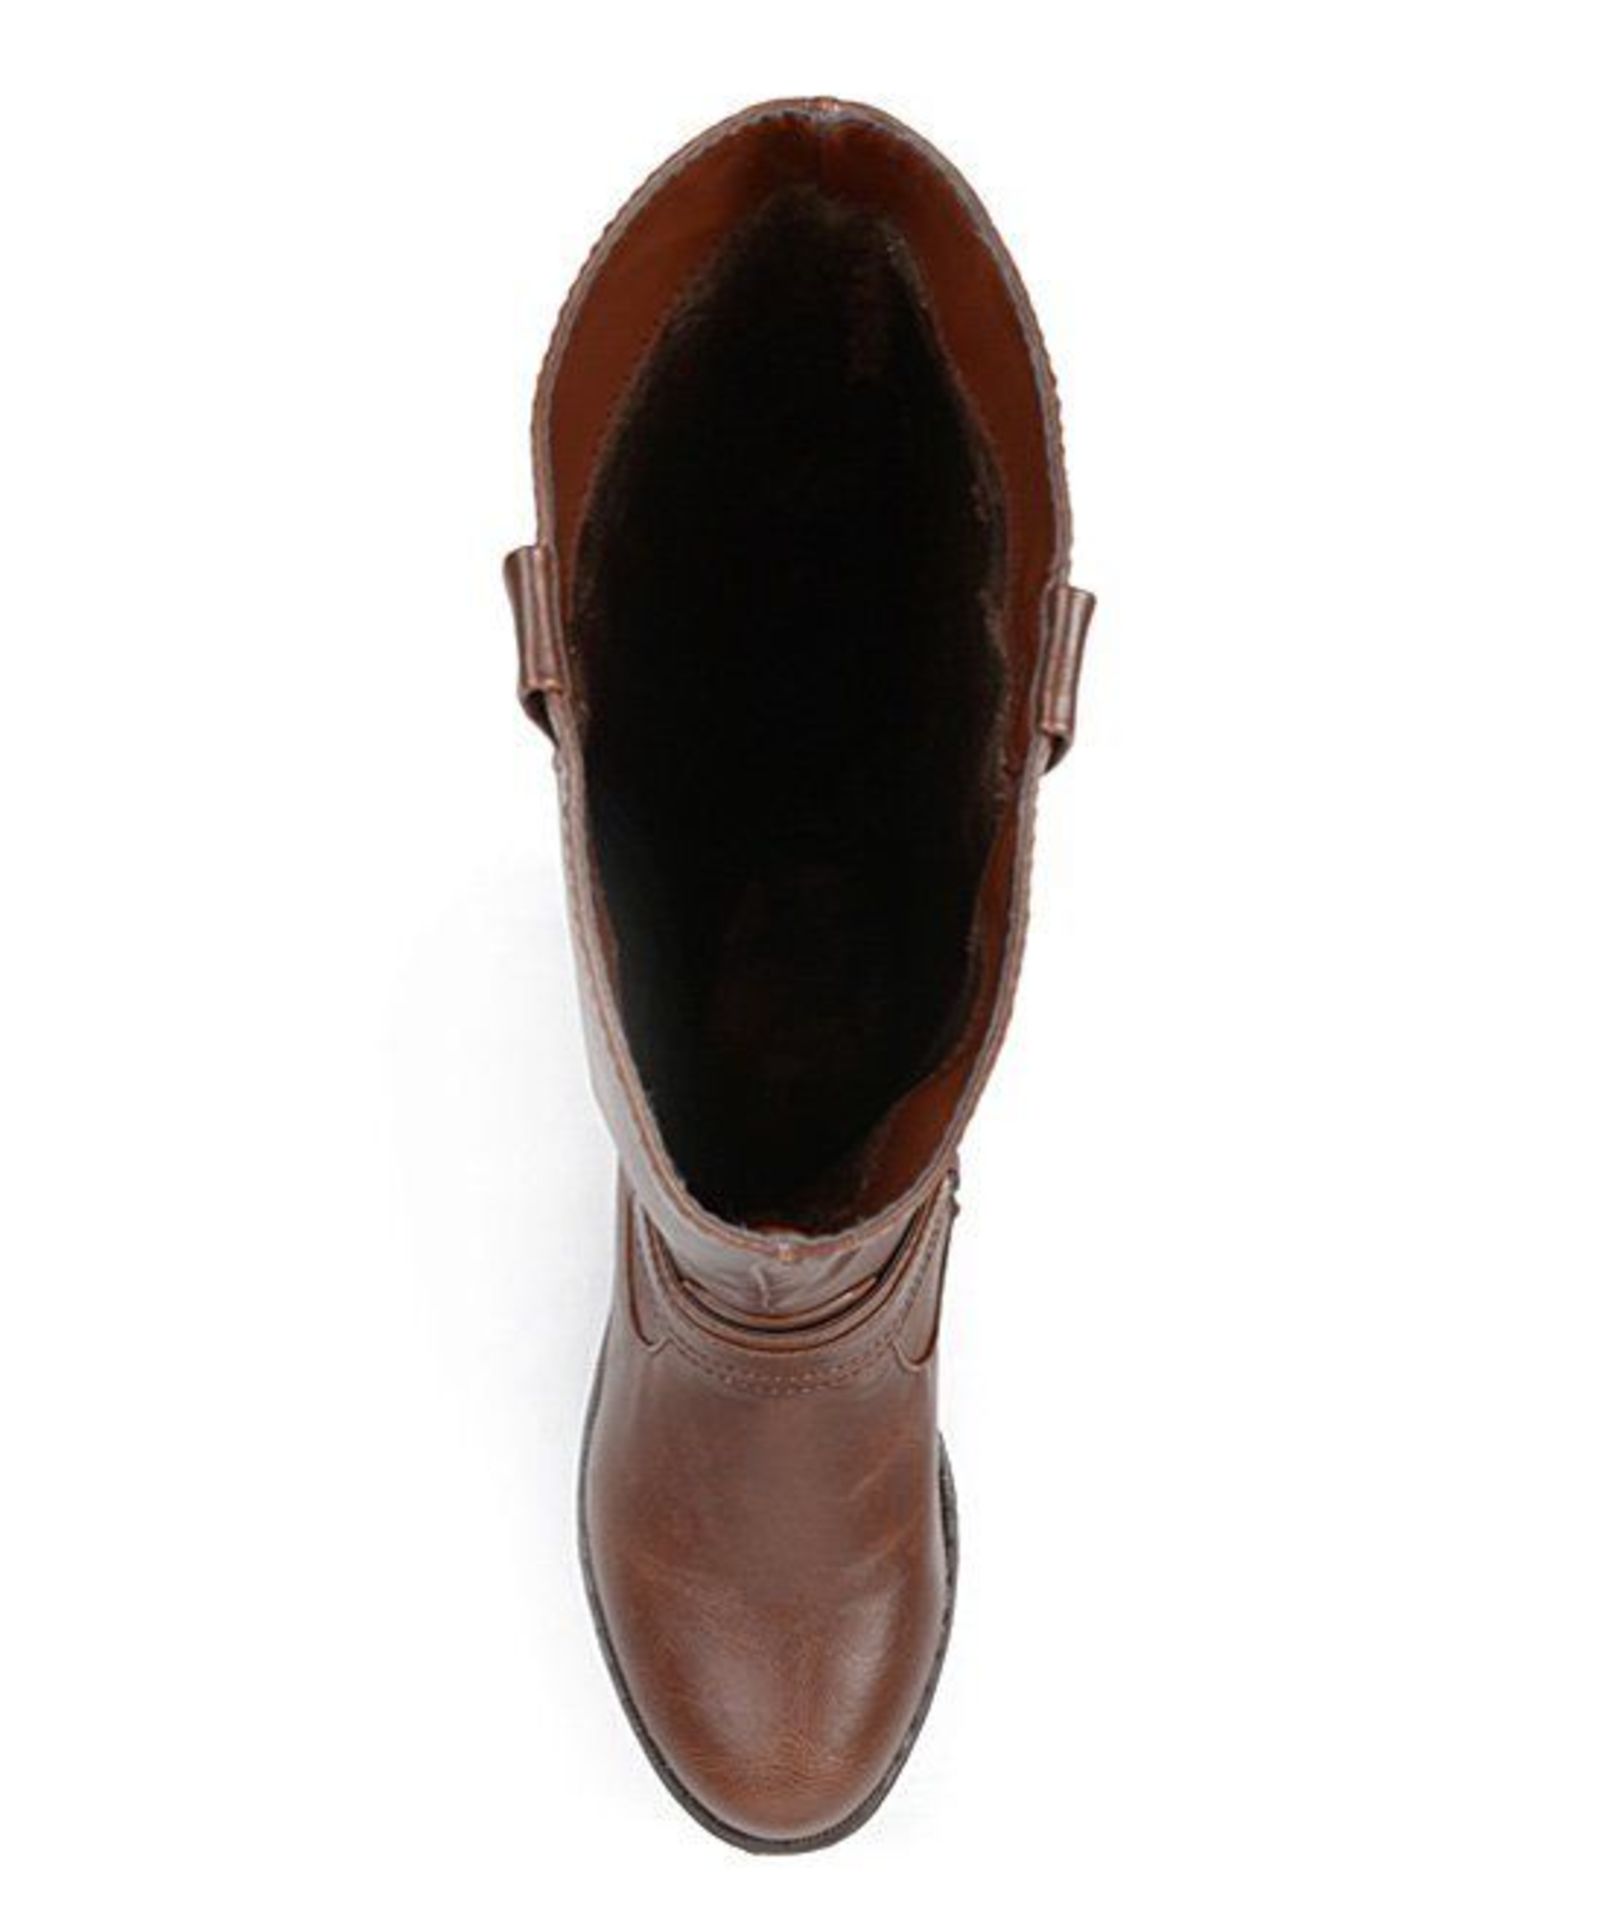 Journee Collection Brown Kai Boot (Uk Size 4.5:Us Size 7) (New with box) [Ref: 14251359-C-002] - Image 5 of 5